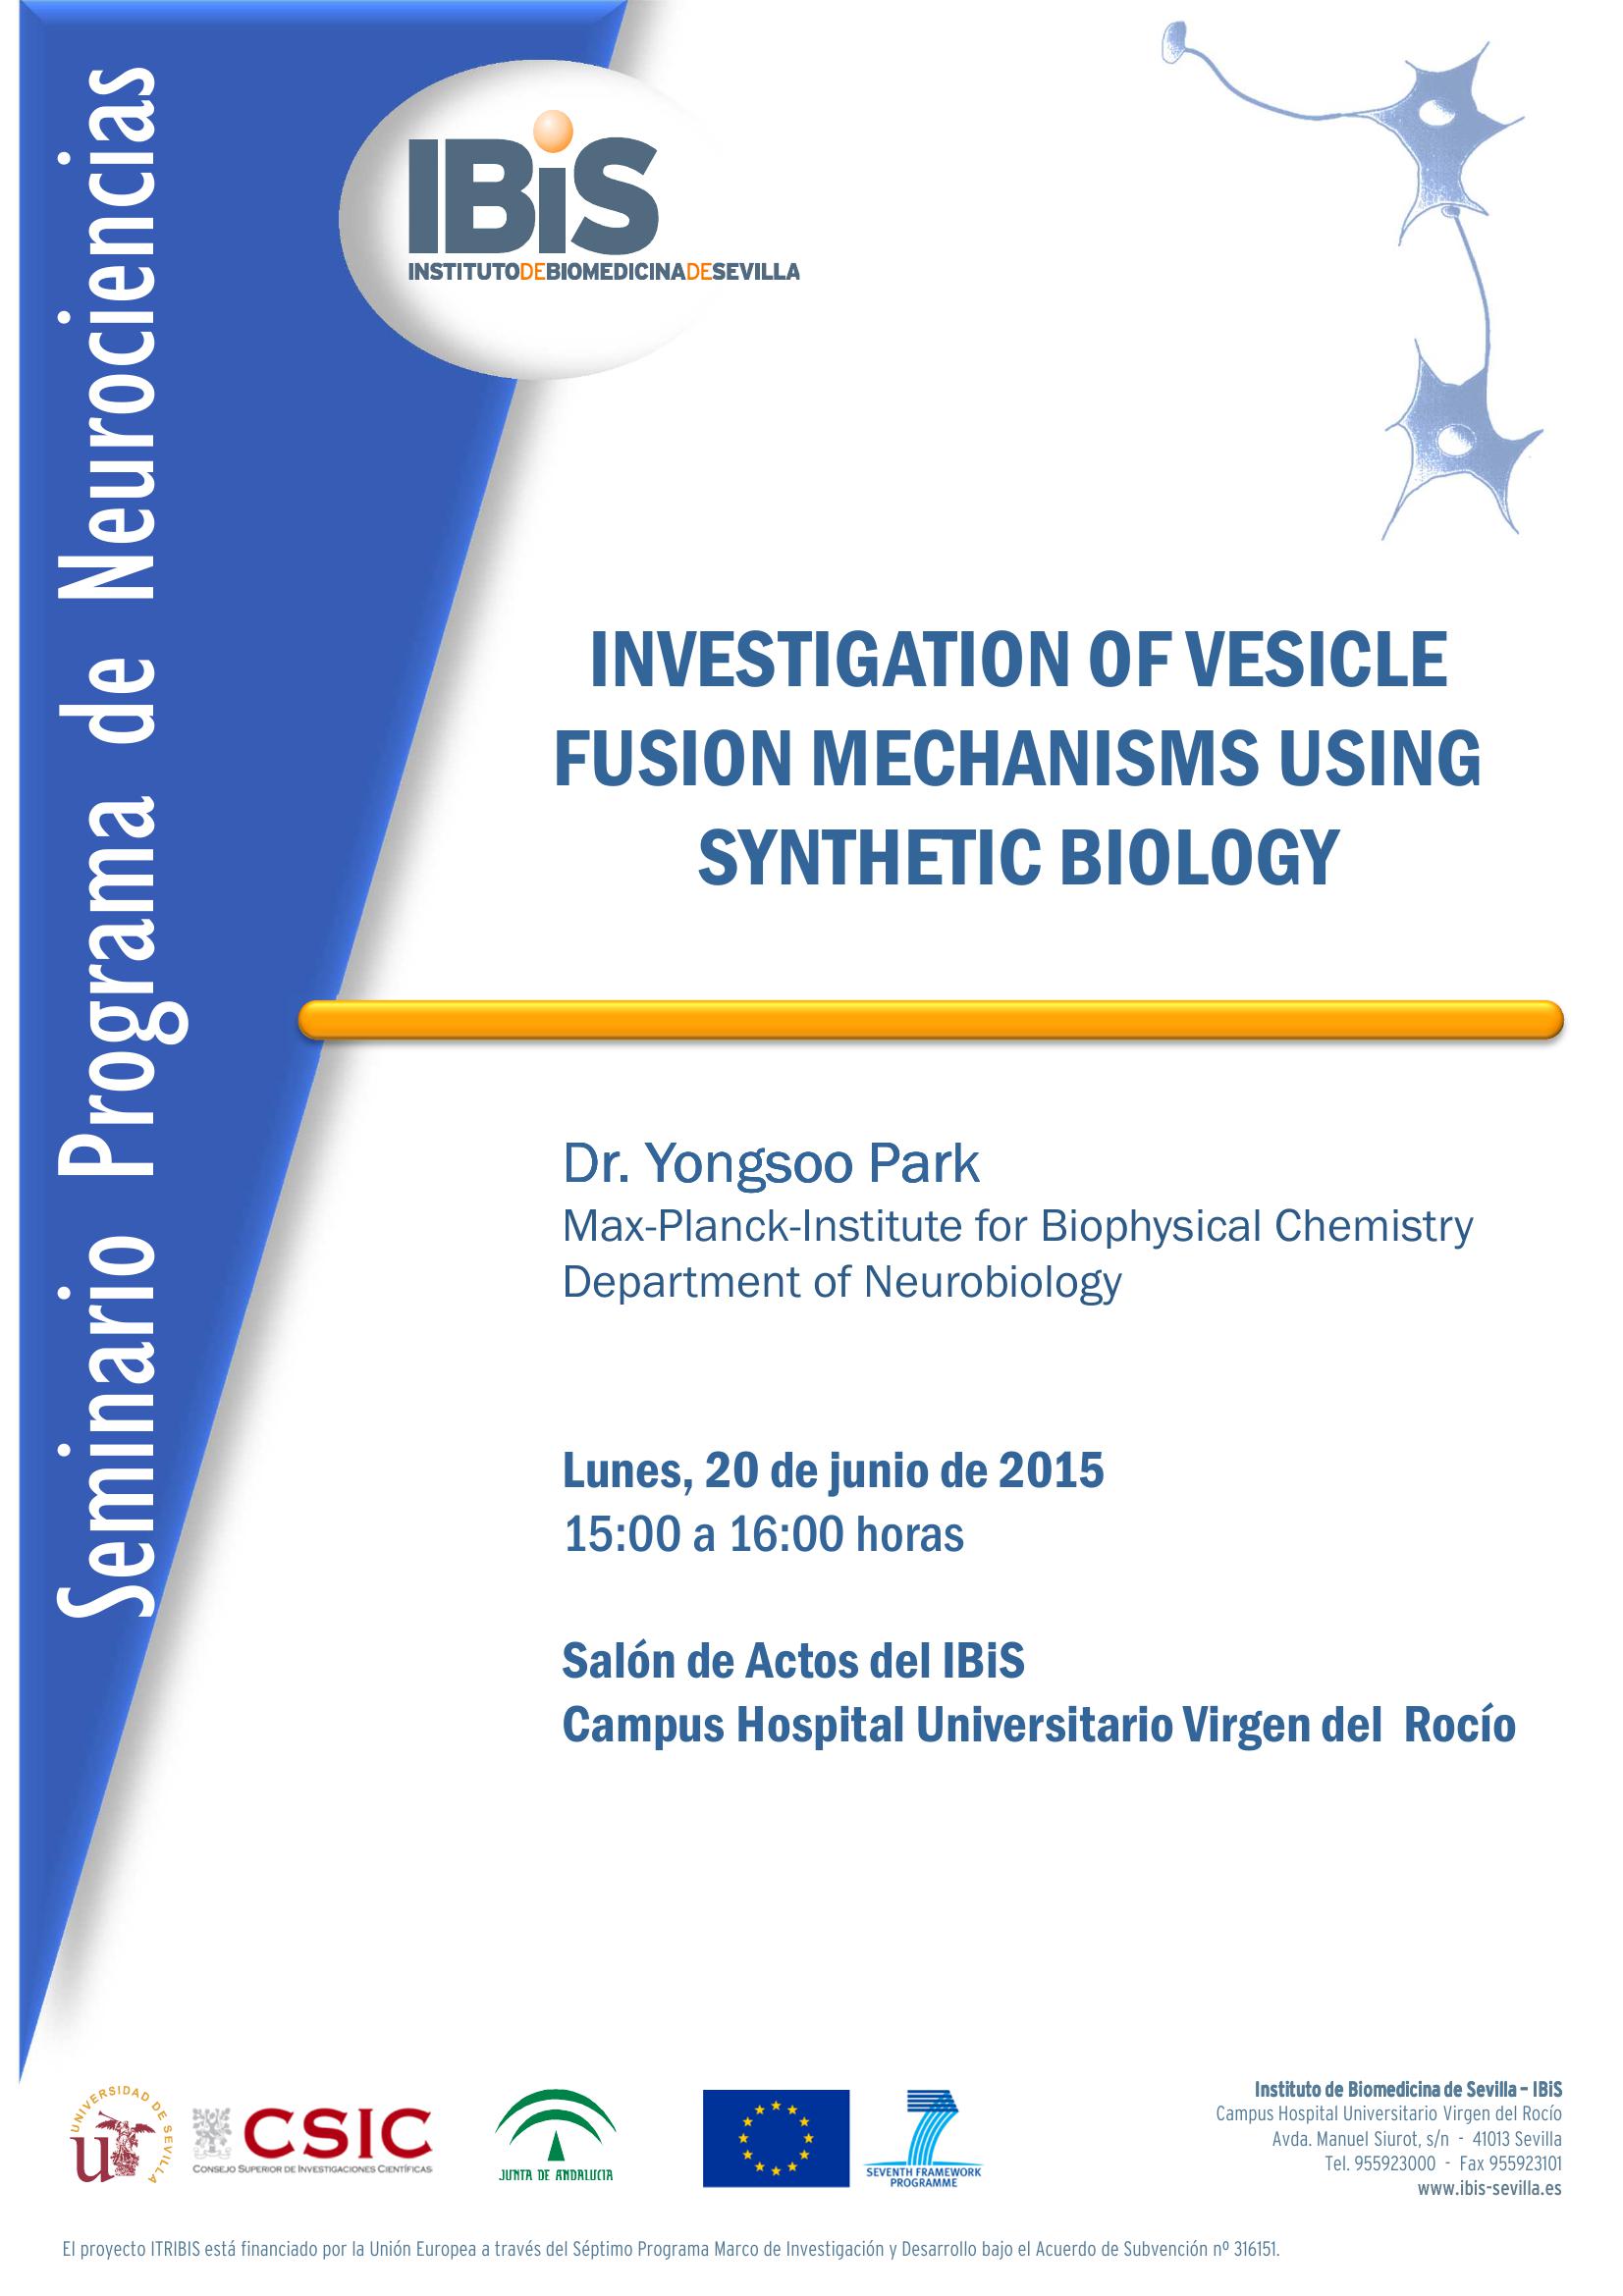 Poster: INVESTIGATION OF VESICLE FUSION MECHANISMS USING SYNTHETIC BIOLOGY